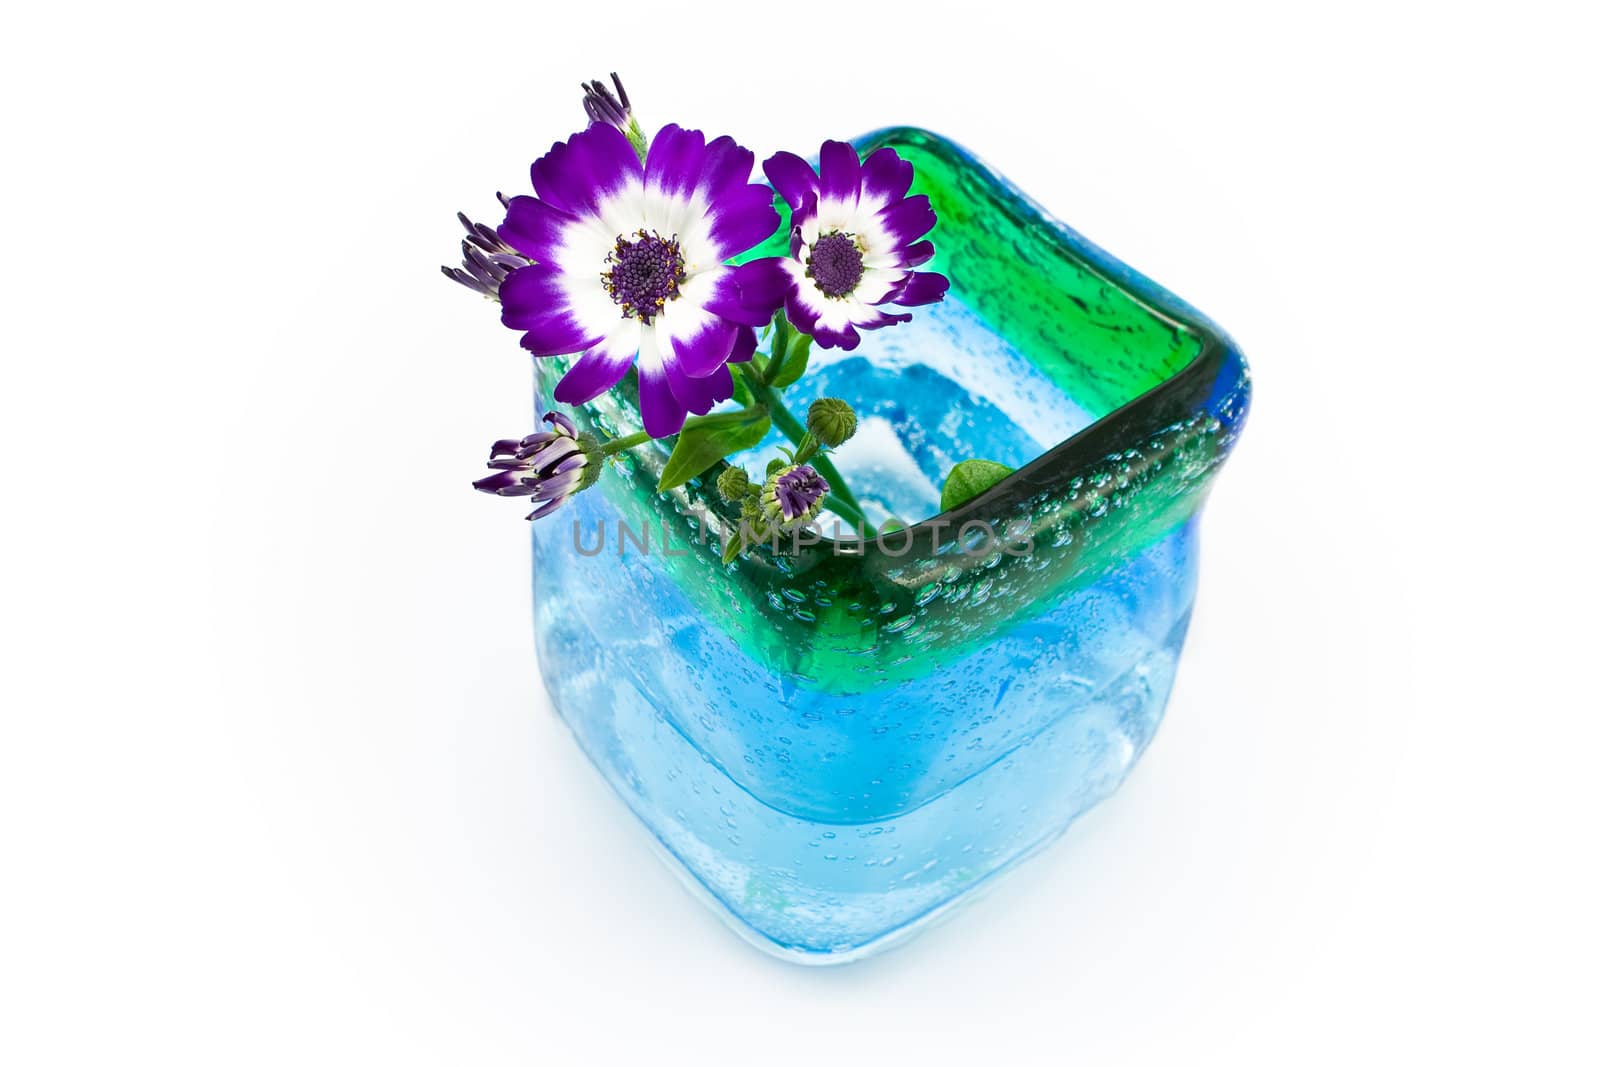 Flowers in blue glass vase isolated on white